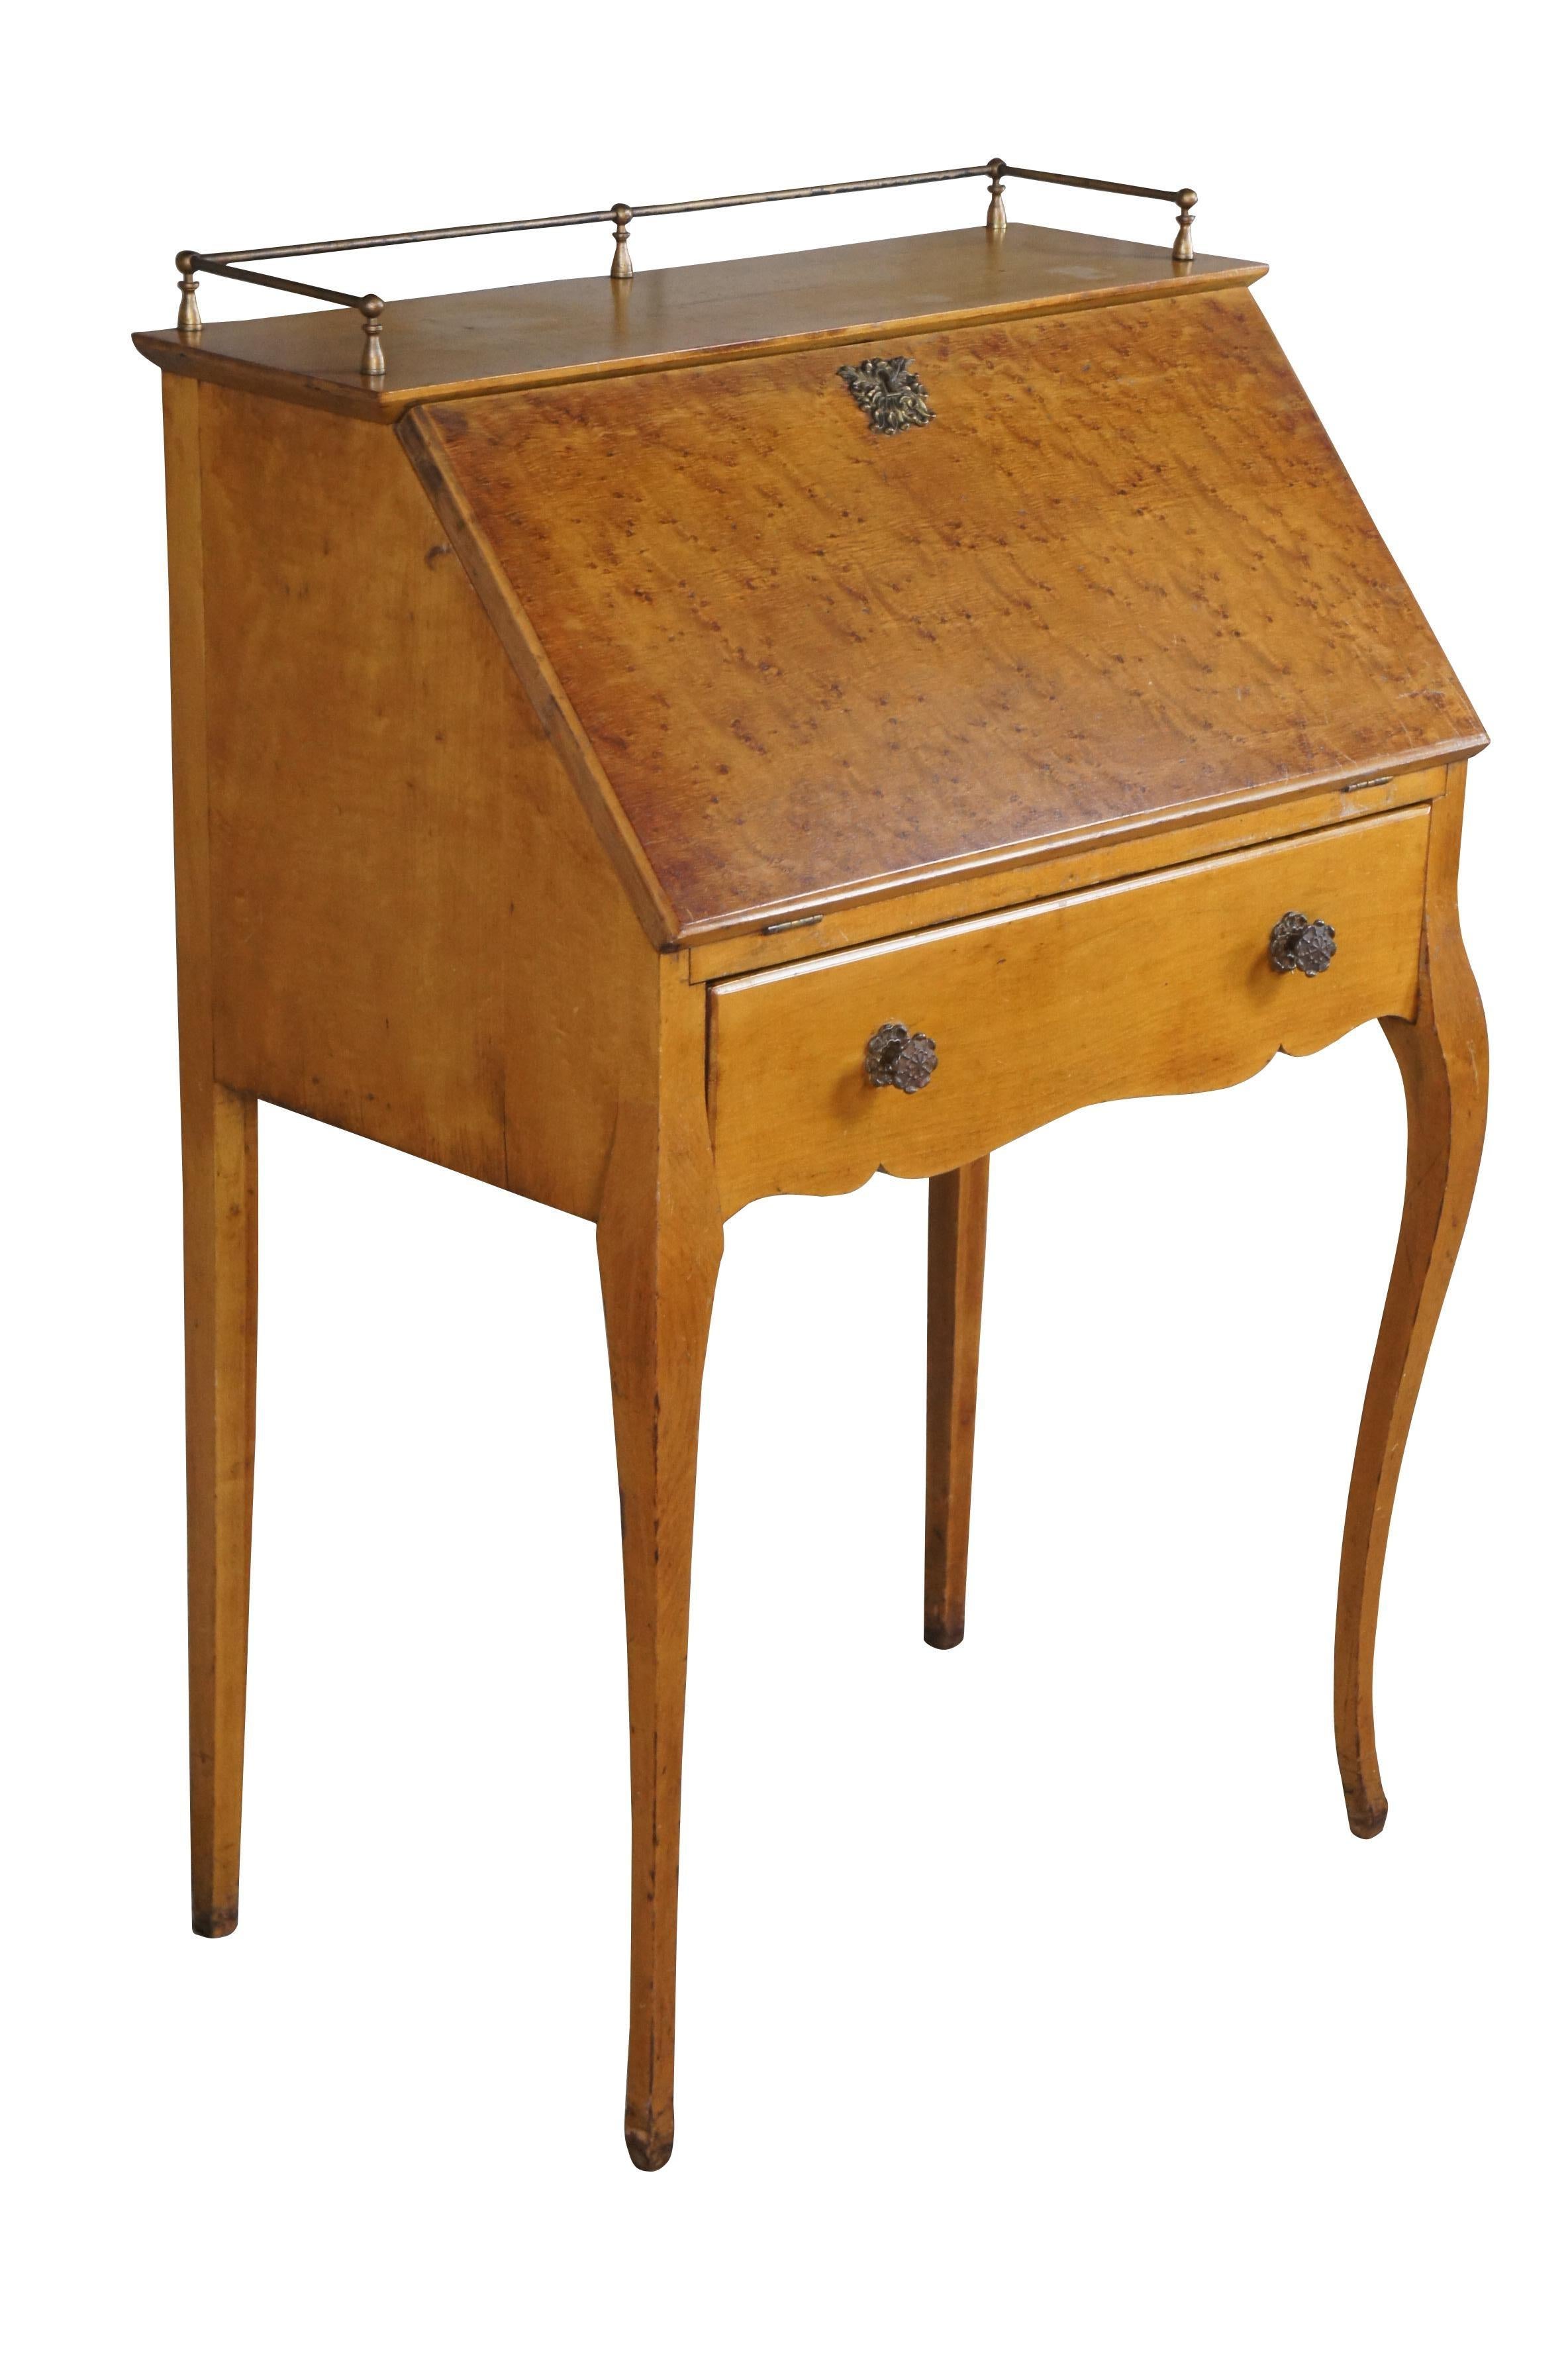 Antique secretary / library writing desk.  Made of  Birdseye Maple featuring drop door that opens to writing surface with multiple cubbies for storage, one large drawer, brass gallery and serpentine front legs.

Dimensions:
26.5